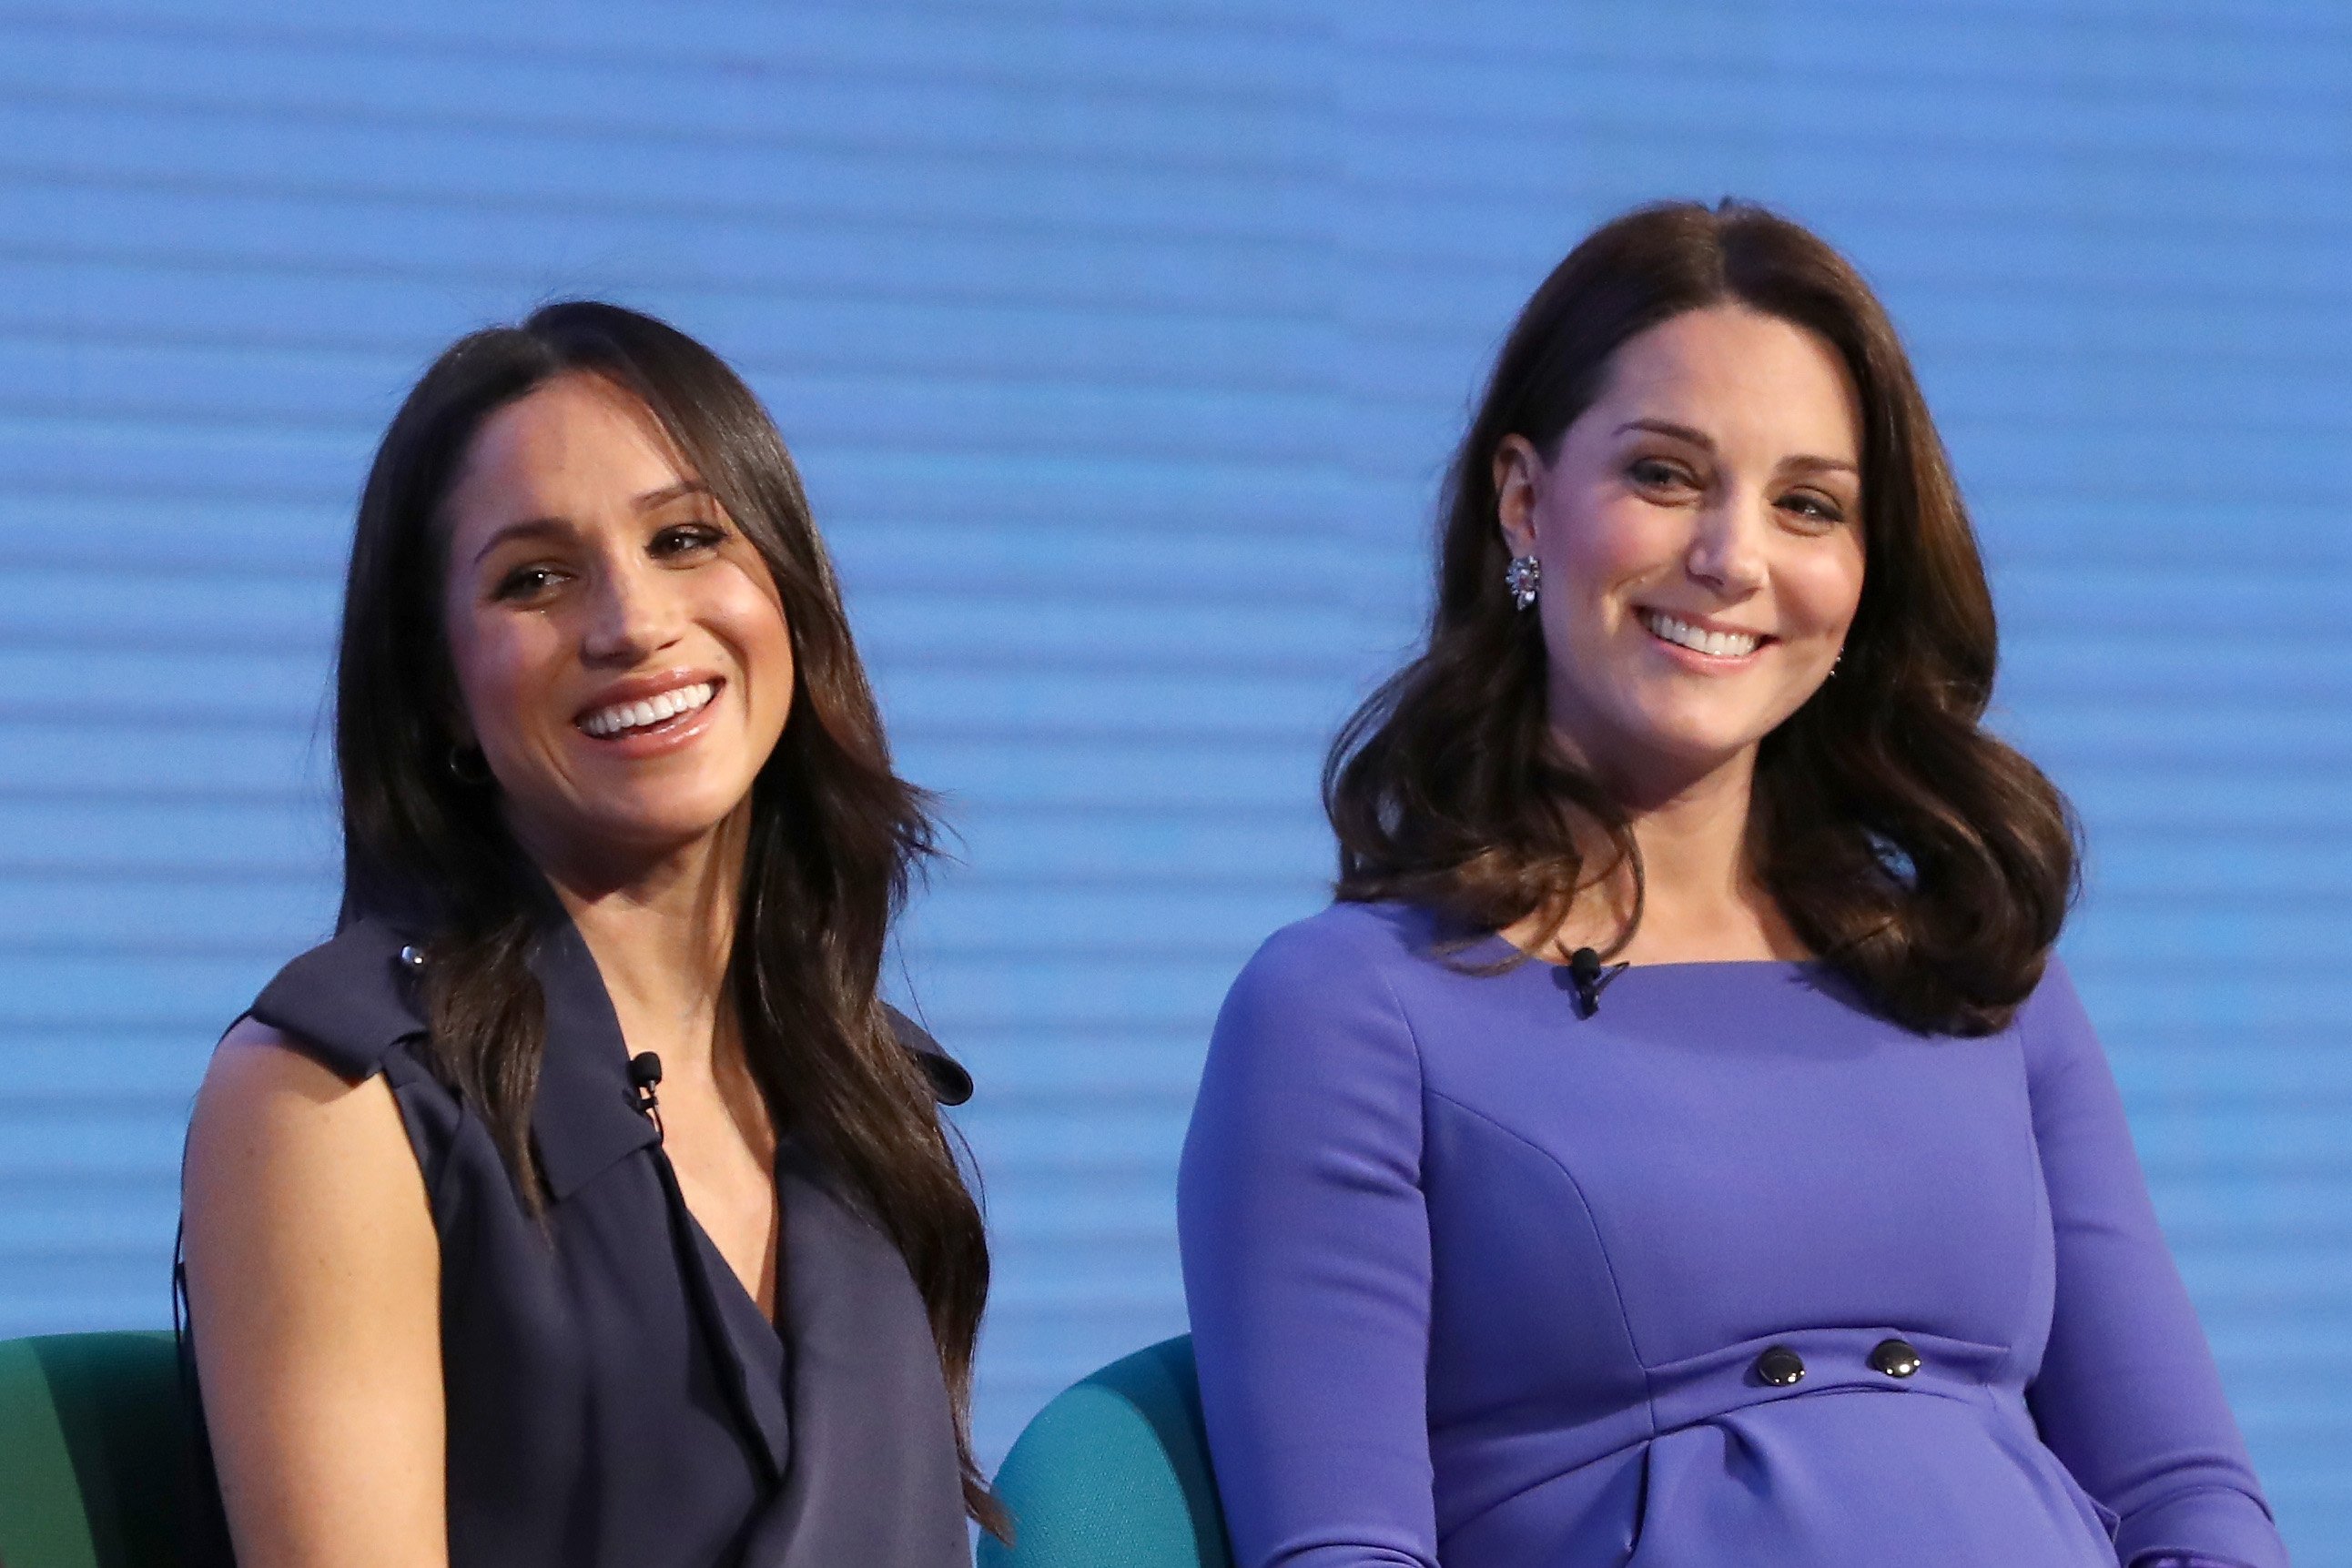 Meghan Markle and Duchess Kate at the first annual Royal Foundation Forum on February 28, 2018, in London, England. | Source: Getty Images